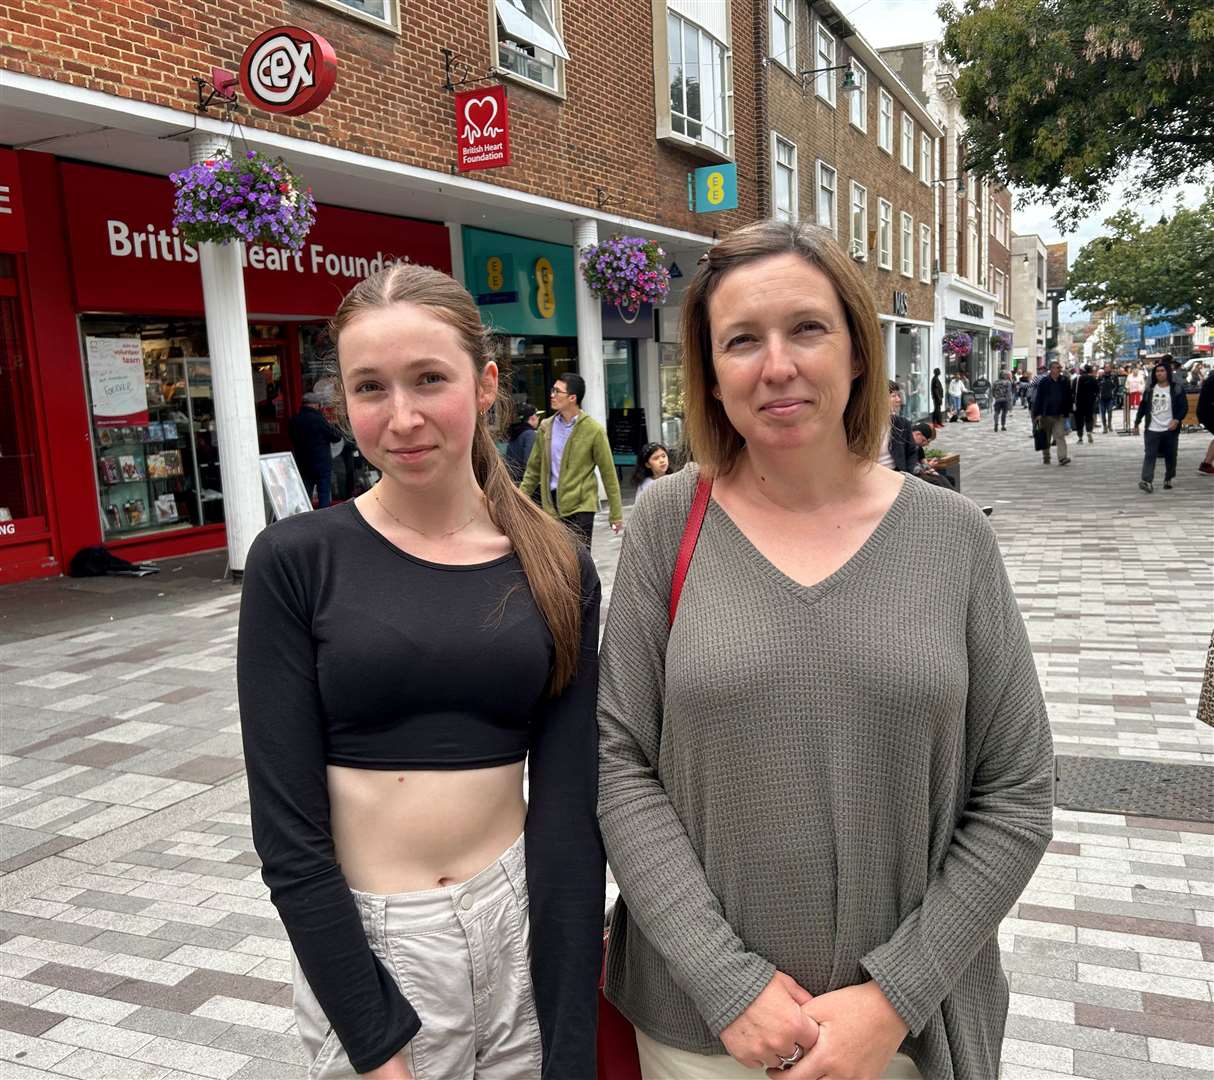 Beth Wells, pictured with daughter Imogen in Canterbury city centre, says she avoids walking by herself in open spaces or woodland